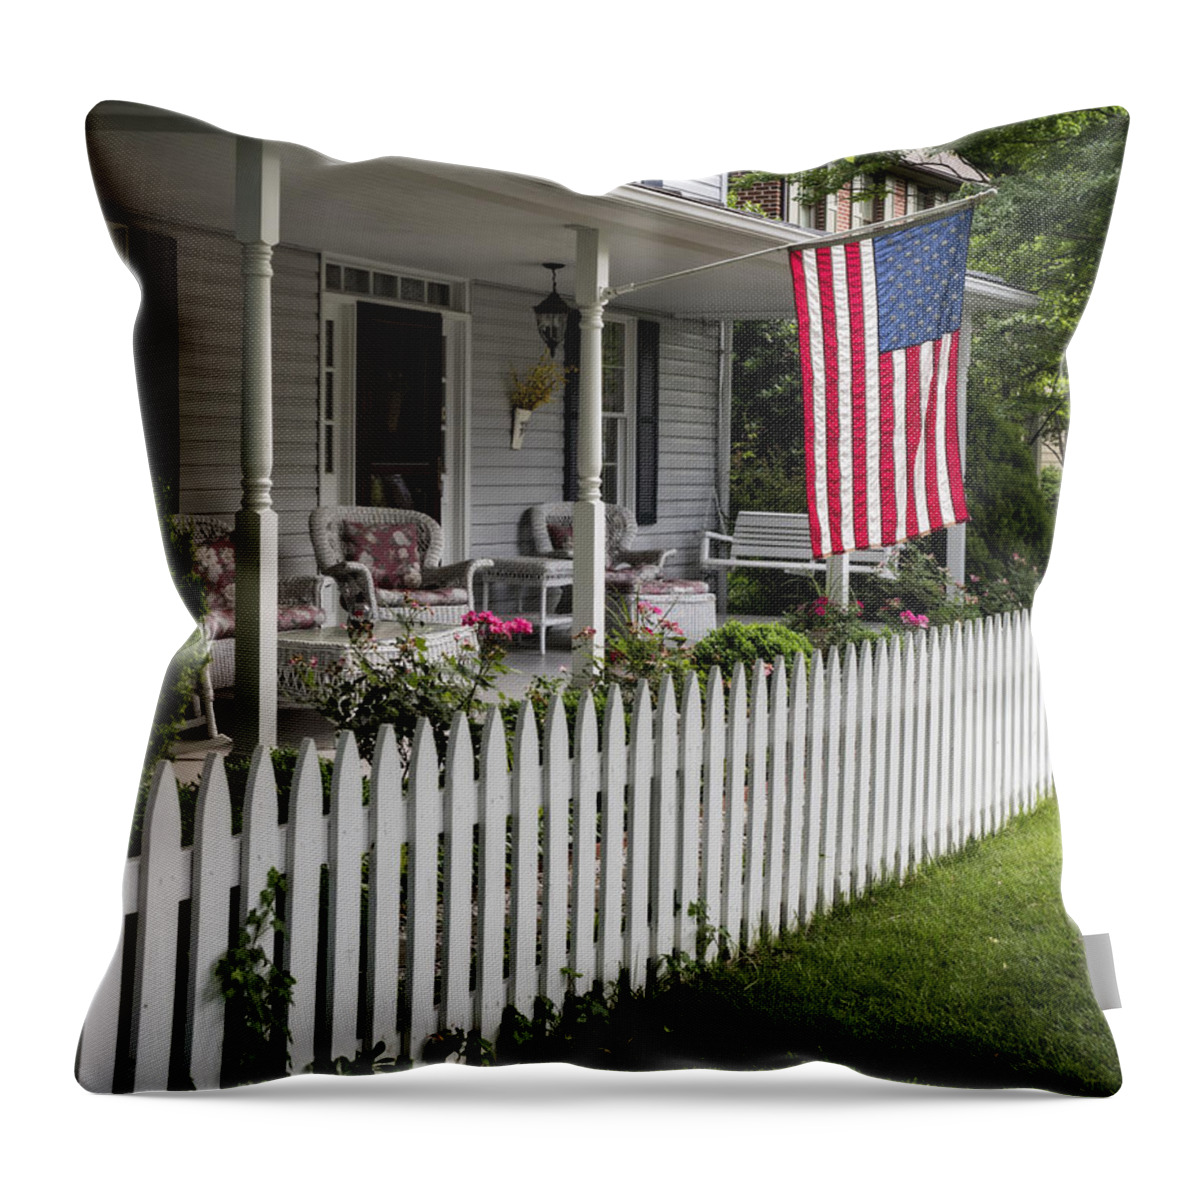 America Throw Pillow featuring the photograph American Dream by David Kay